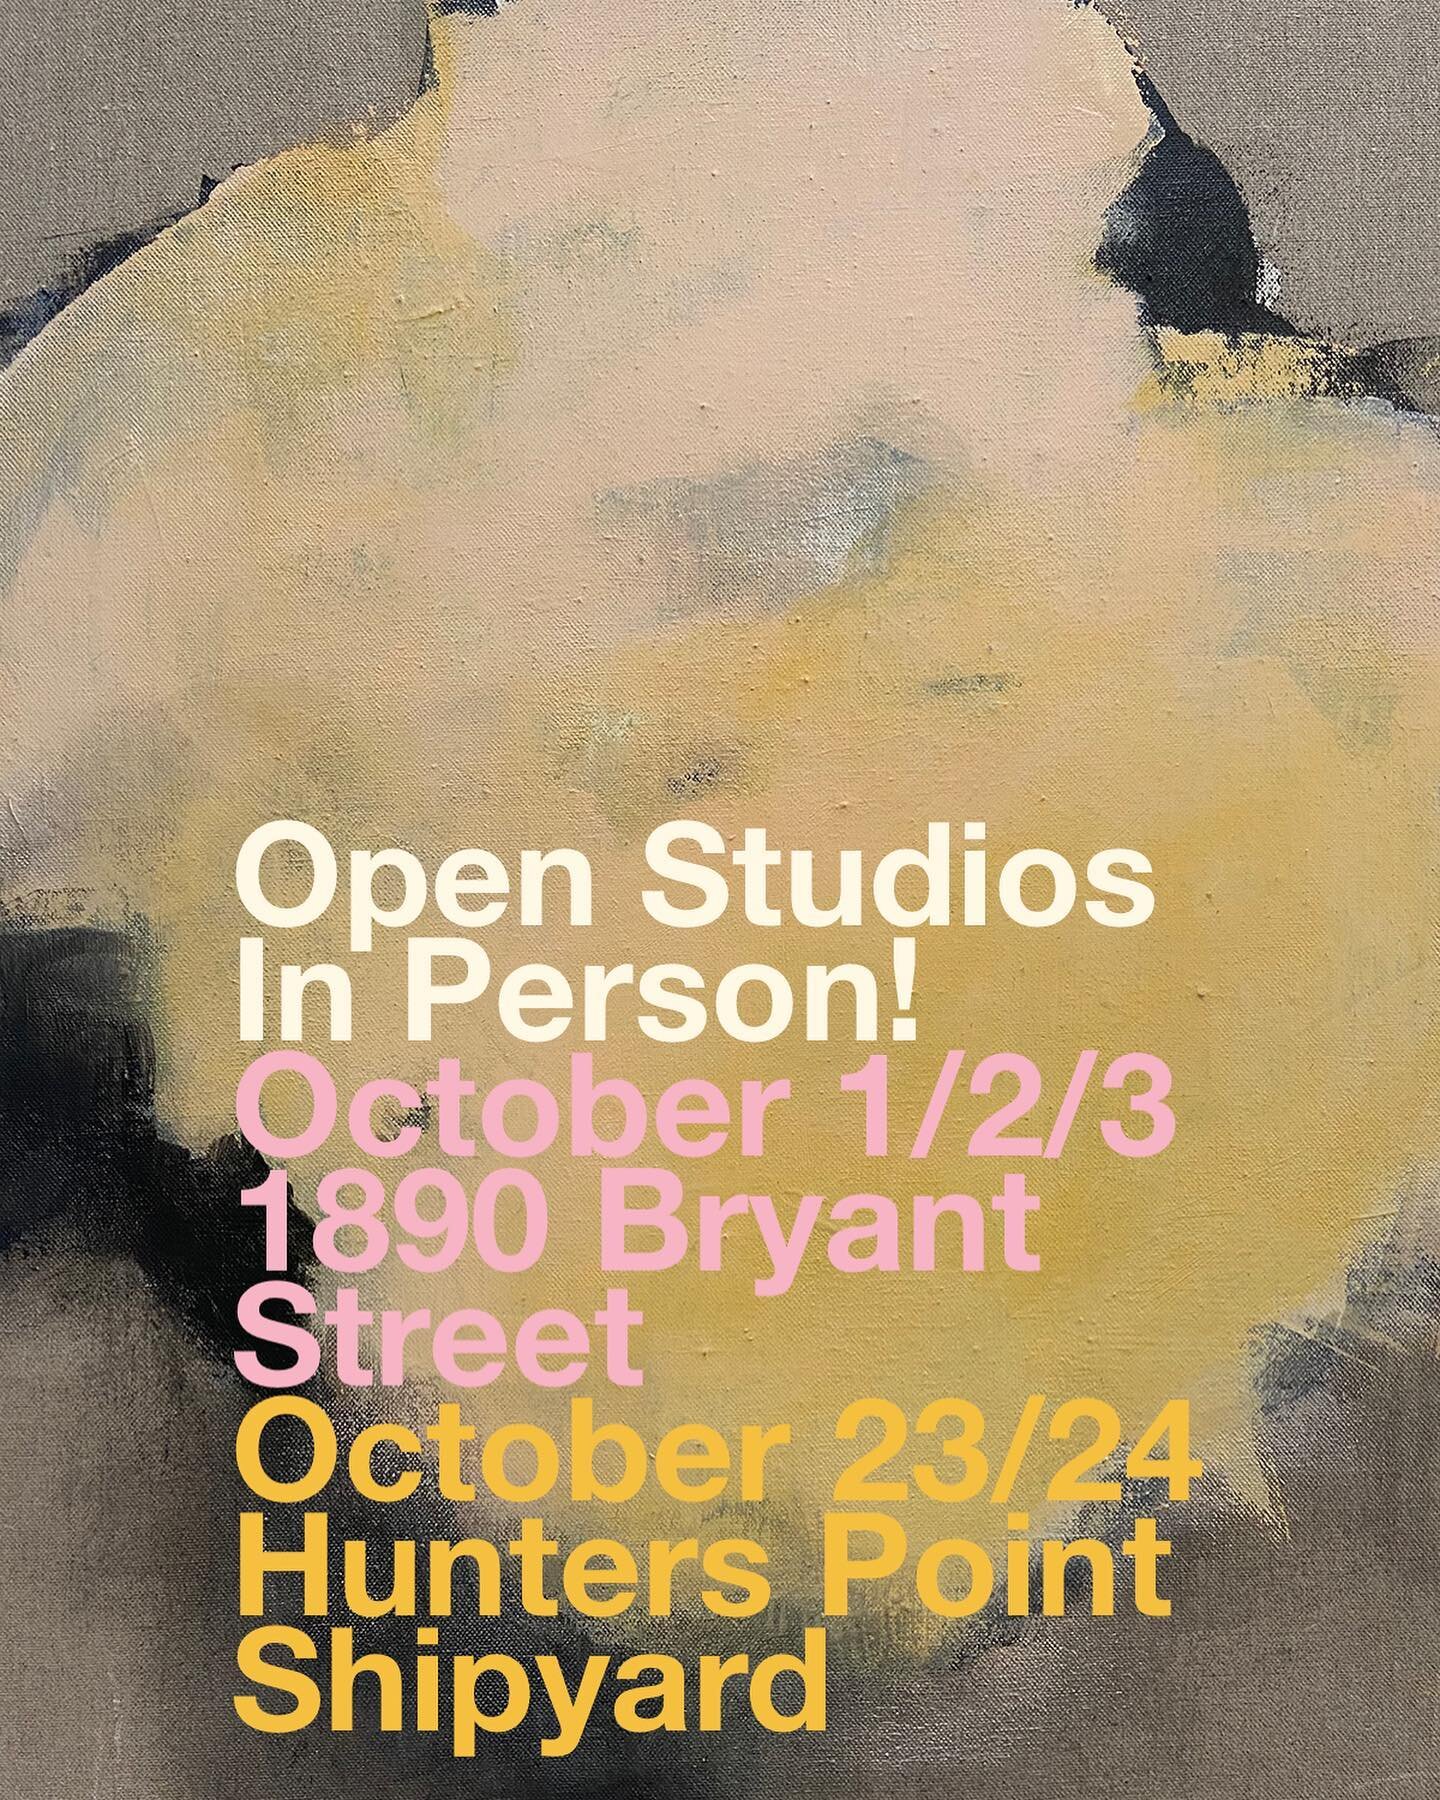 Looking forward to seeing you all in person! 

This weekend I will be showing at #1890bryantstreetstudios. Friday night preview from 6-9pm, Saturday and Sunday noon - 6pm.
 
October 23 &amp; 24 I will be opening my door at Hunters Point Shipyard. 
Sa